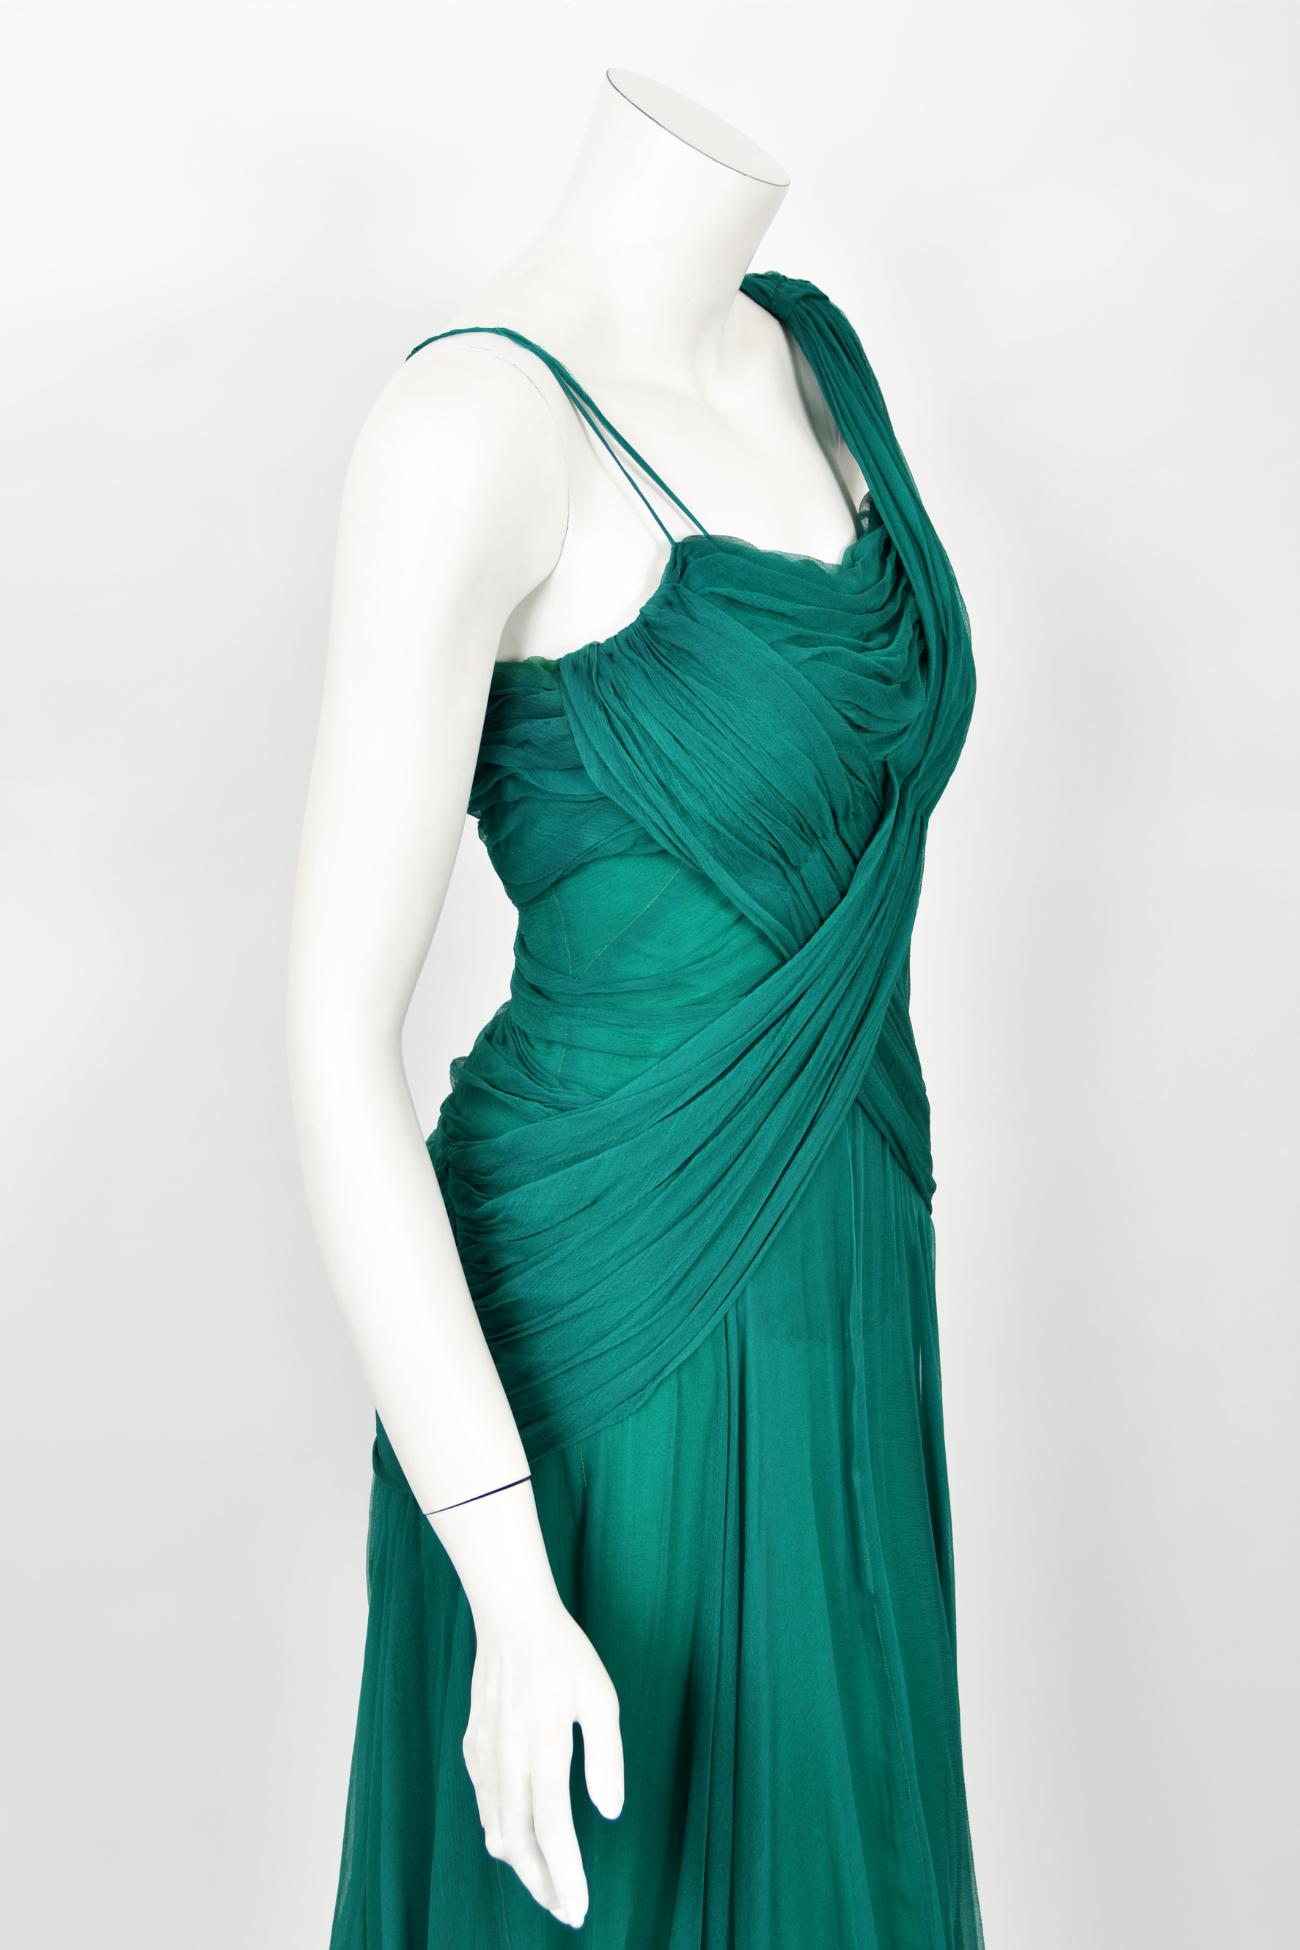 Vintage 1950's Irene Lentz Couture Teal Green Draped Silk Grecian Goddess Gown For Sale 5